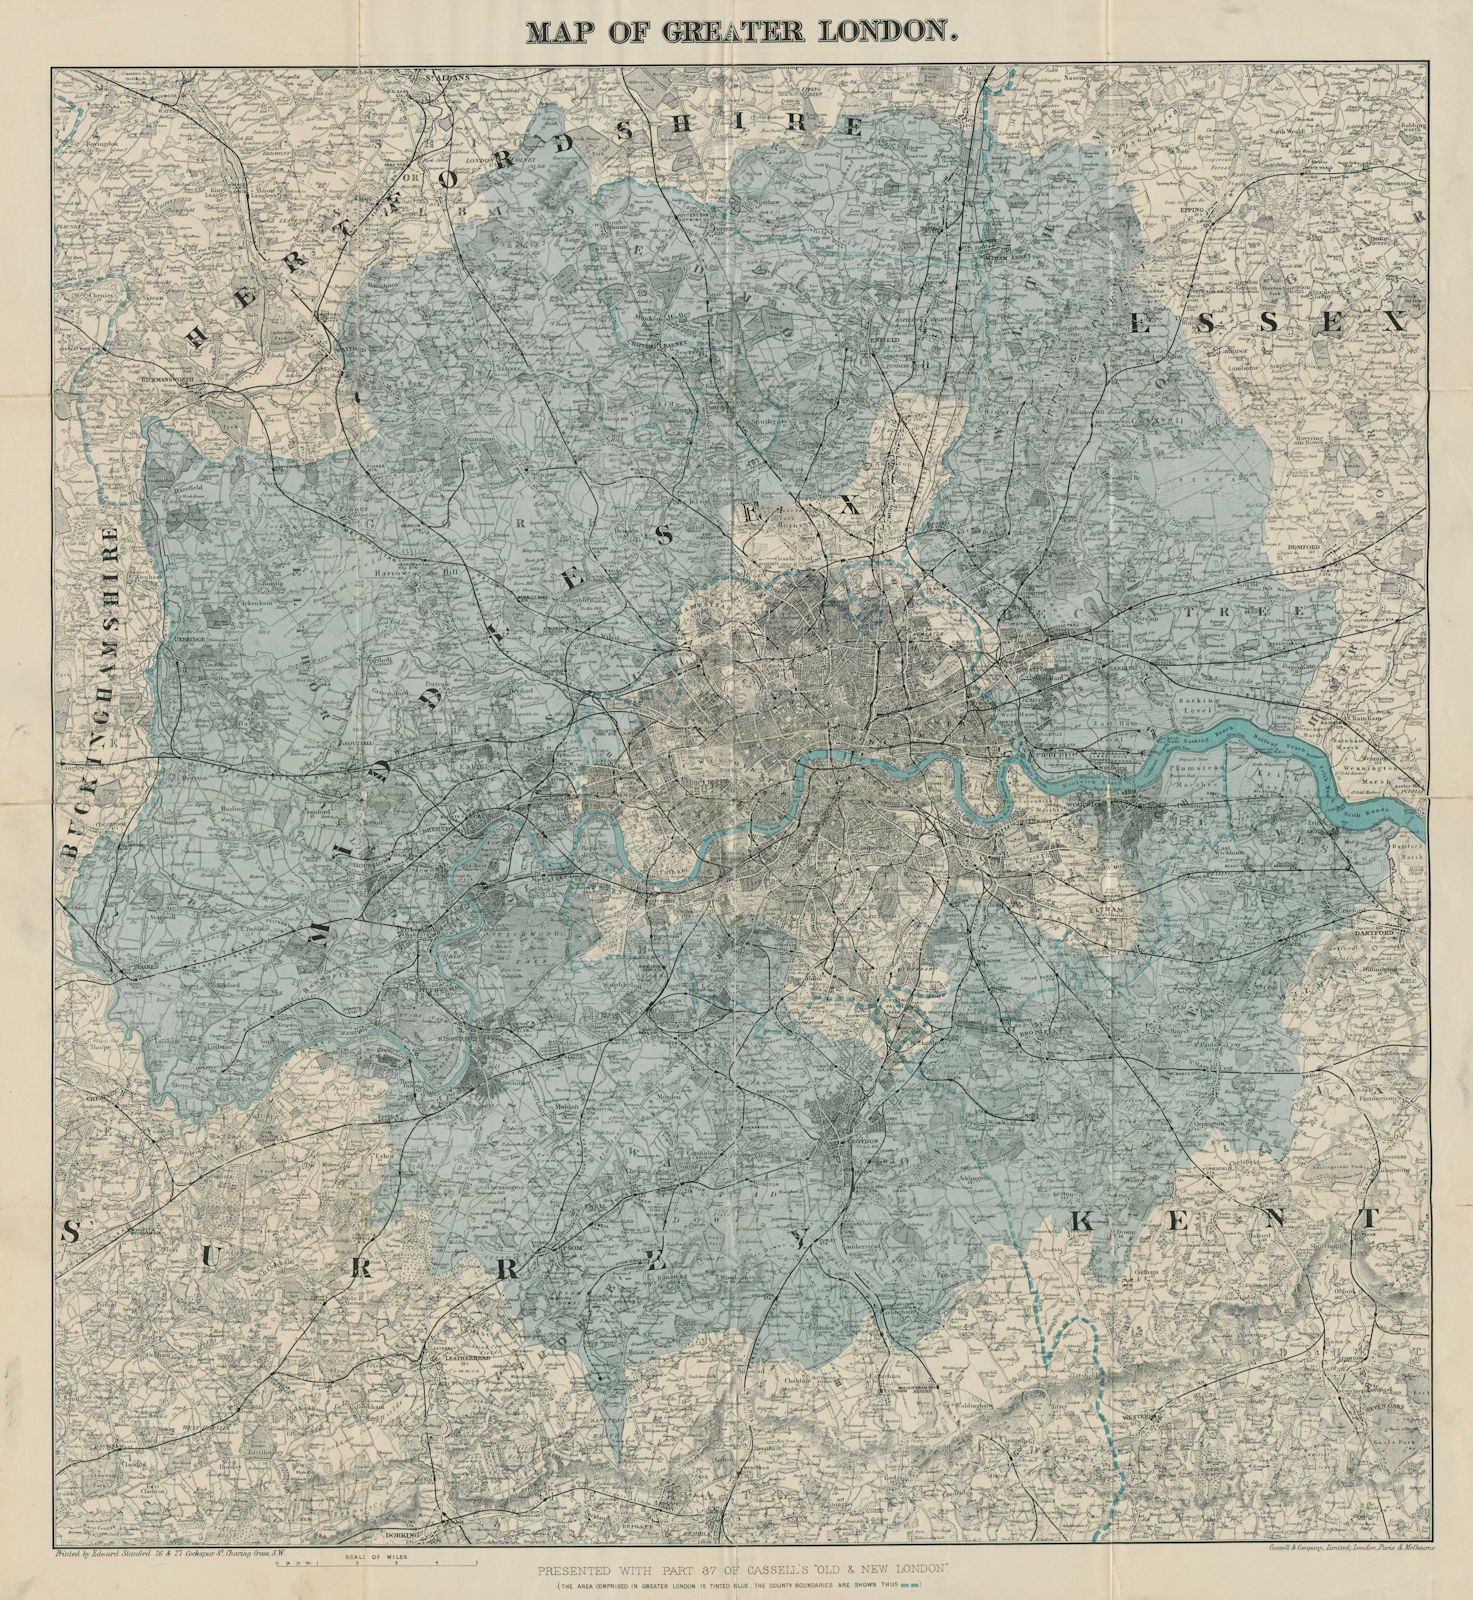 Large folding map of GREATER LONDON by Edward STANFORD. 75x86cm c1890